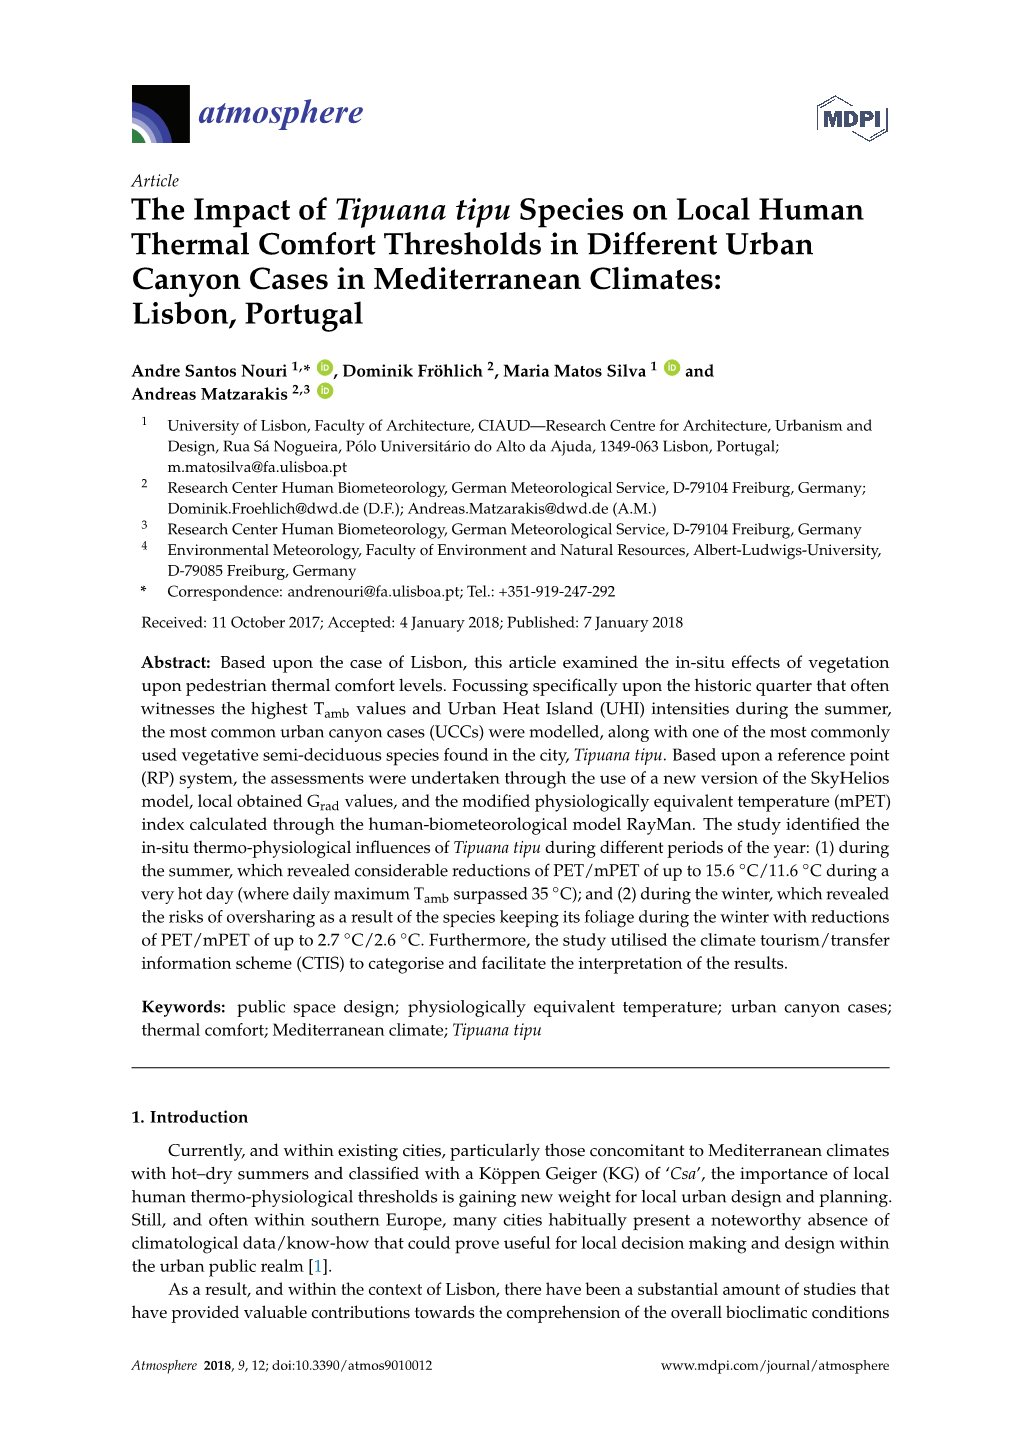 The Impact of Tipuana Tipu Species on Local Human Thermal Comfort Thresholds in Different Urban Canyon Cases in Mediterranean Climates: Lisbon, Portugal